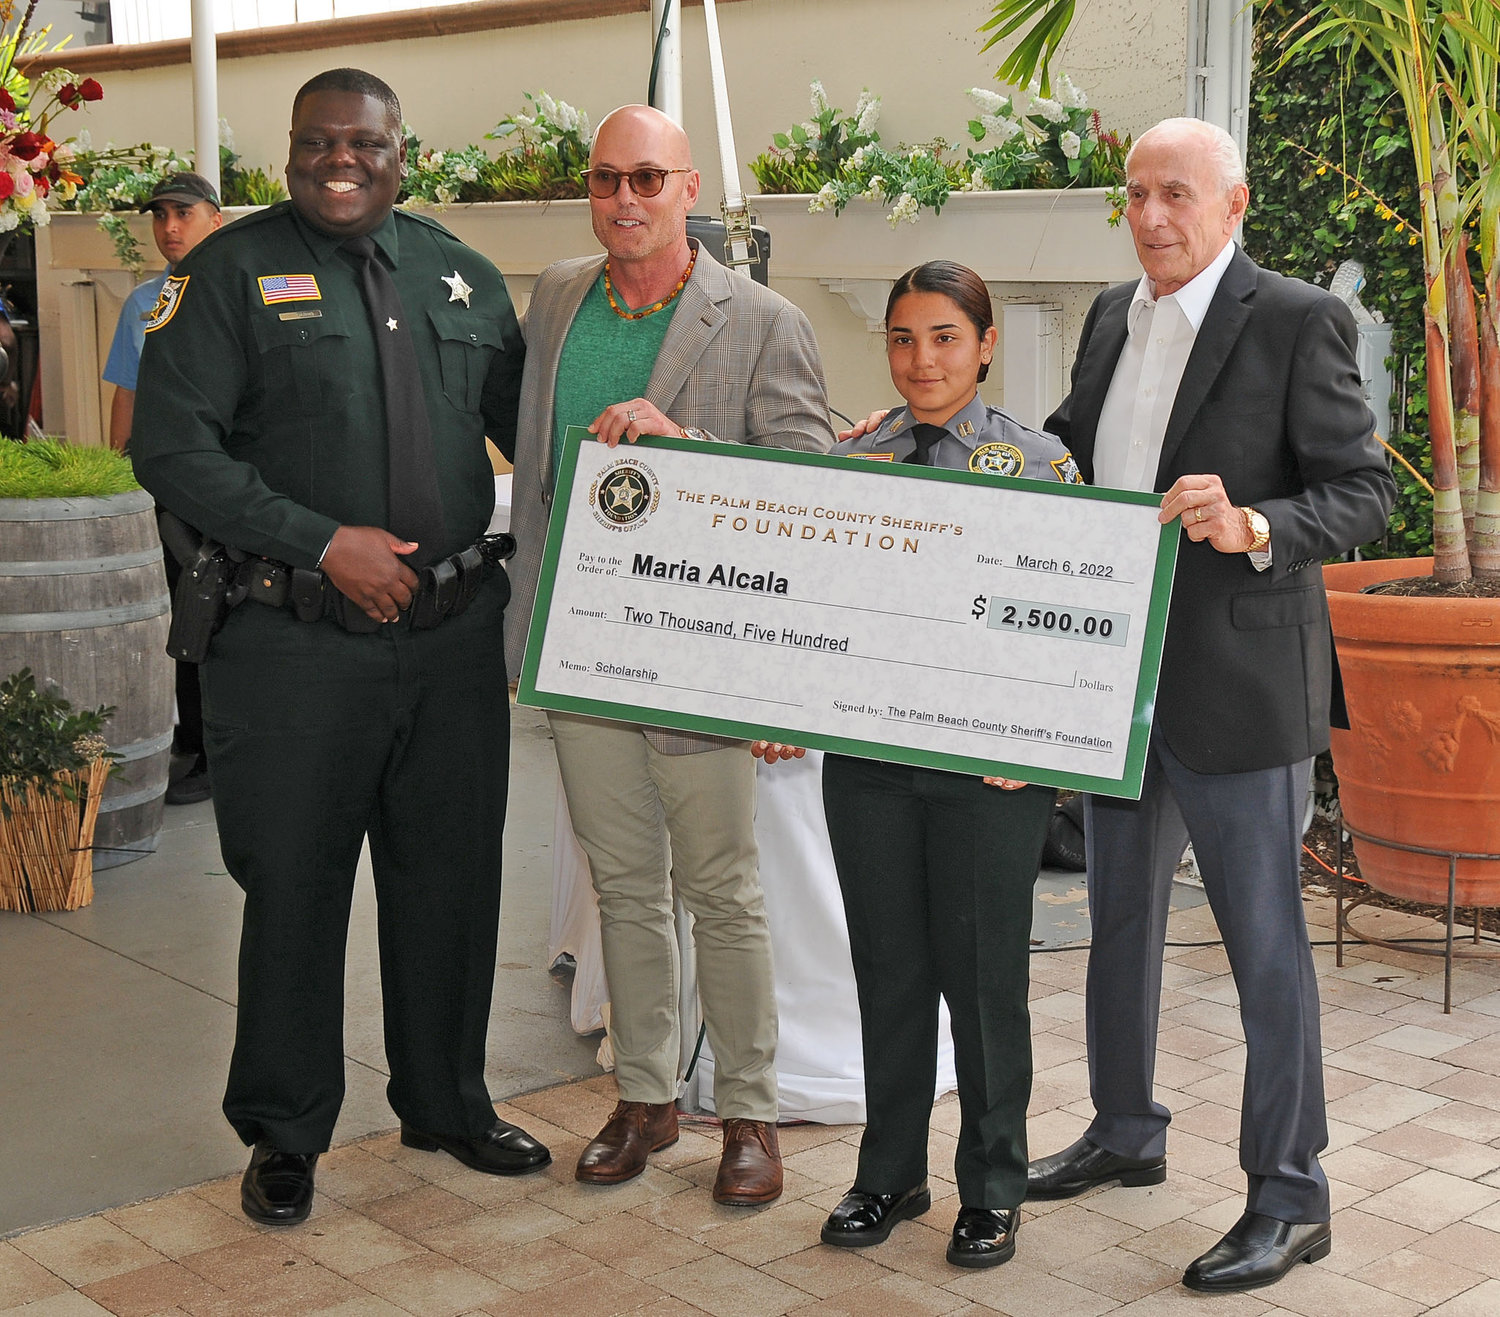 PBSO Deputy Johnny Young, Sheriff’s Foundation Director Lance Ivey, Maria Alcala from Glades Day School and PBSO Chief Deputy Frank DeMario.